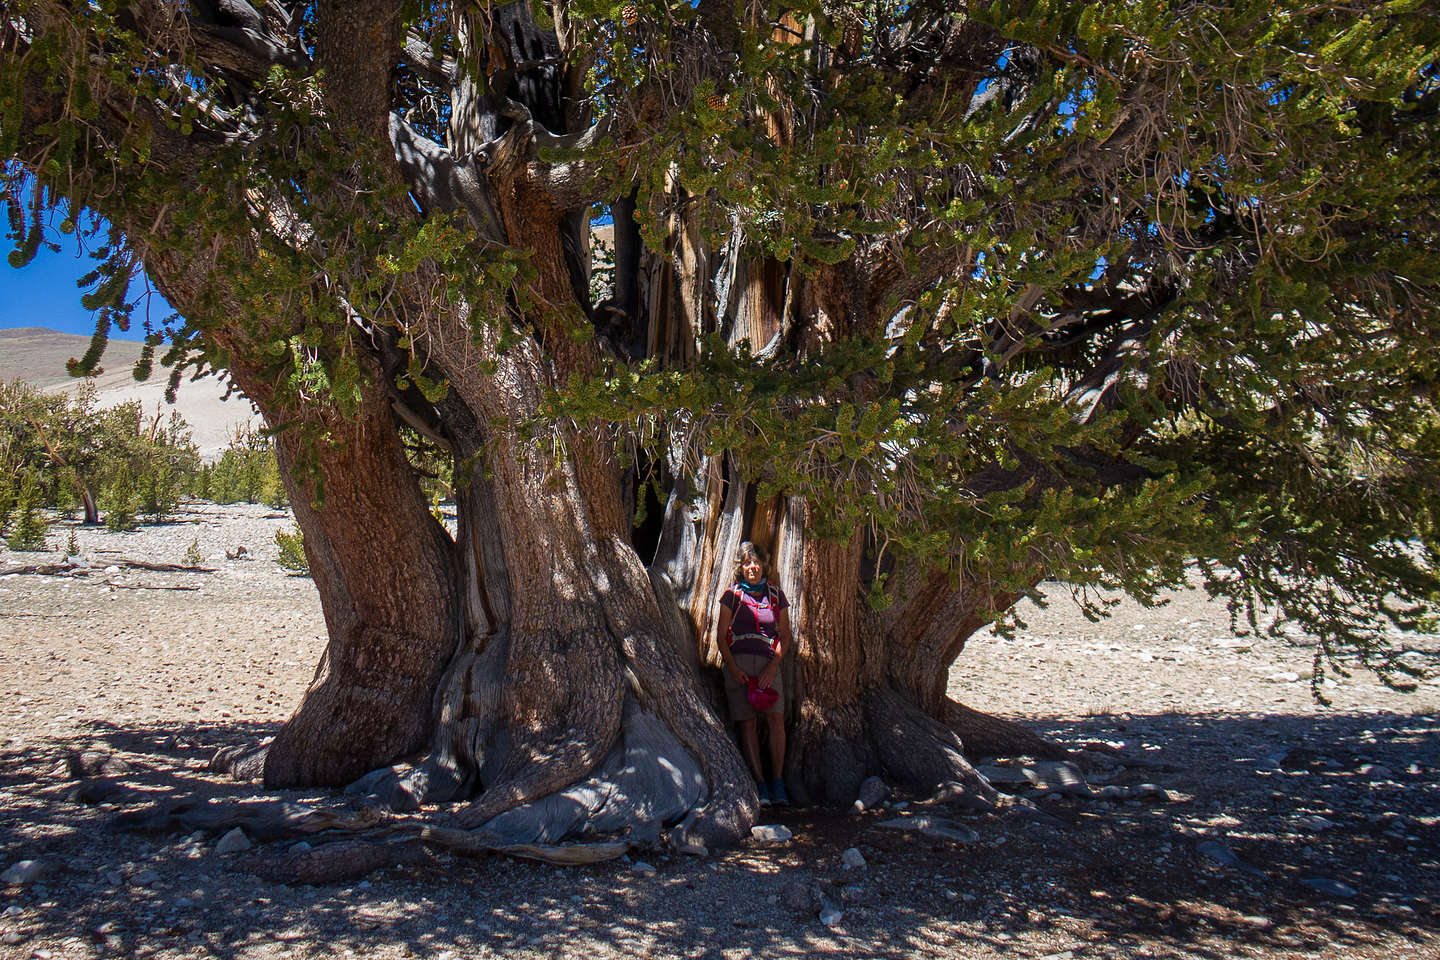 Lolo and the Patriarch Tree